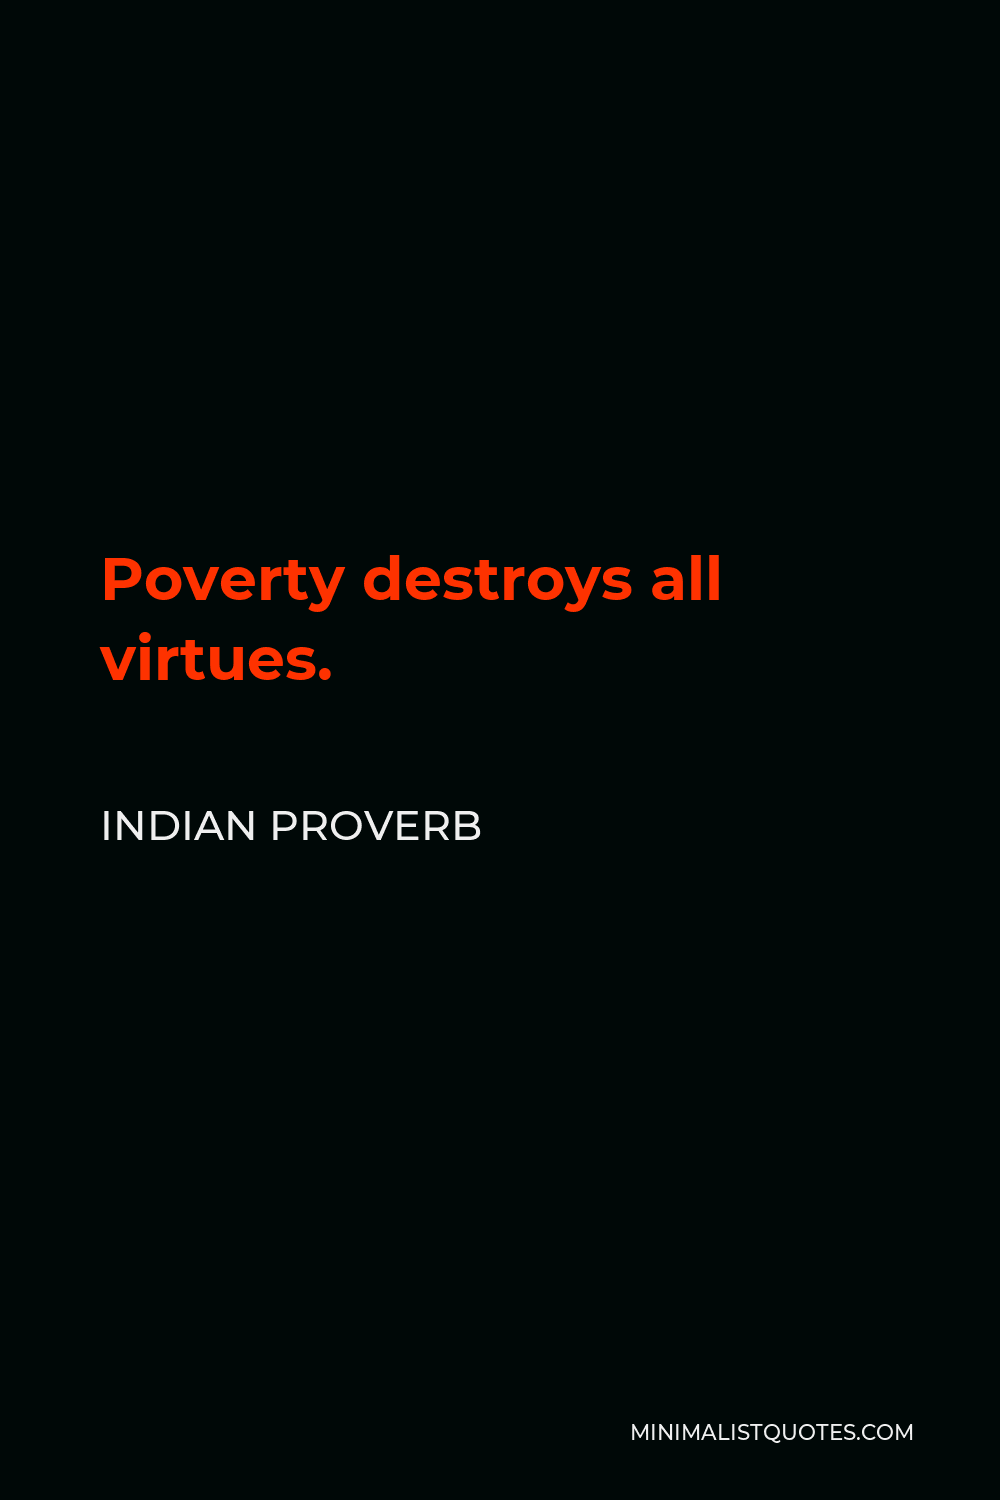 Indian Proverb Quote - Poverty destroys all virtues.